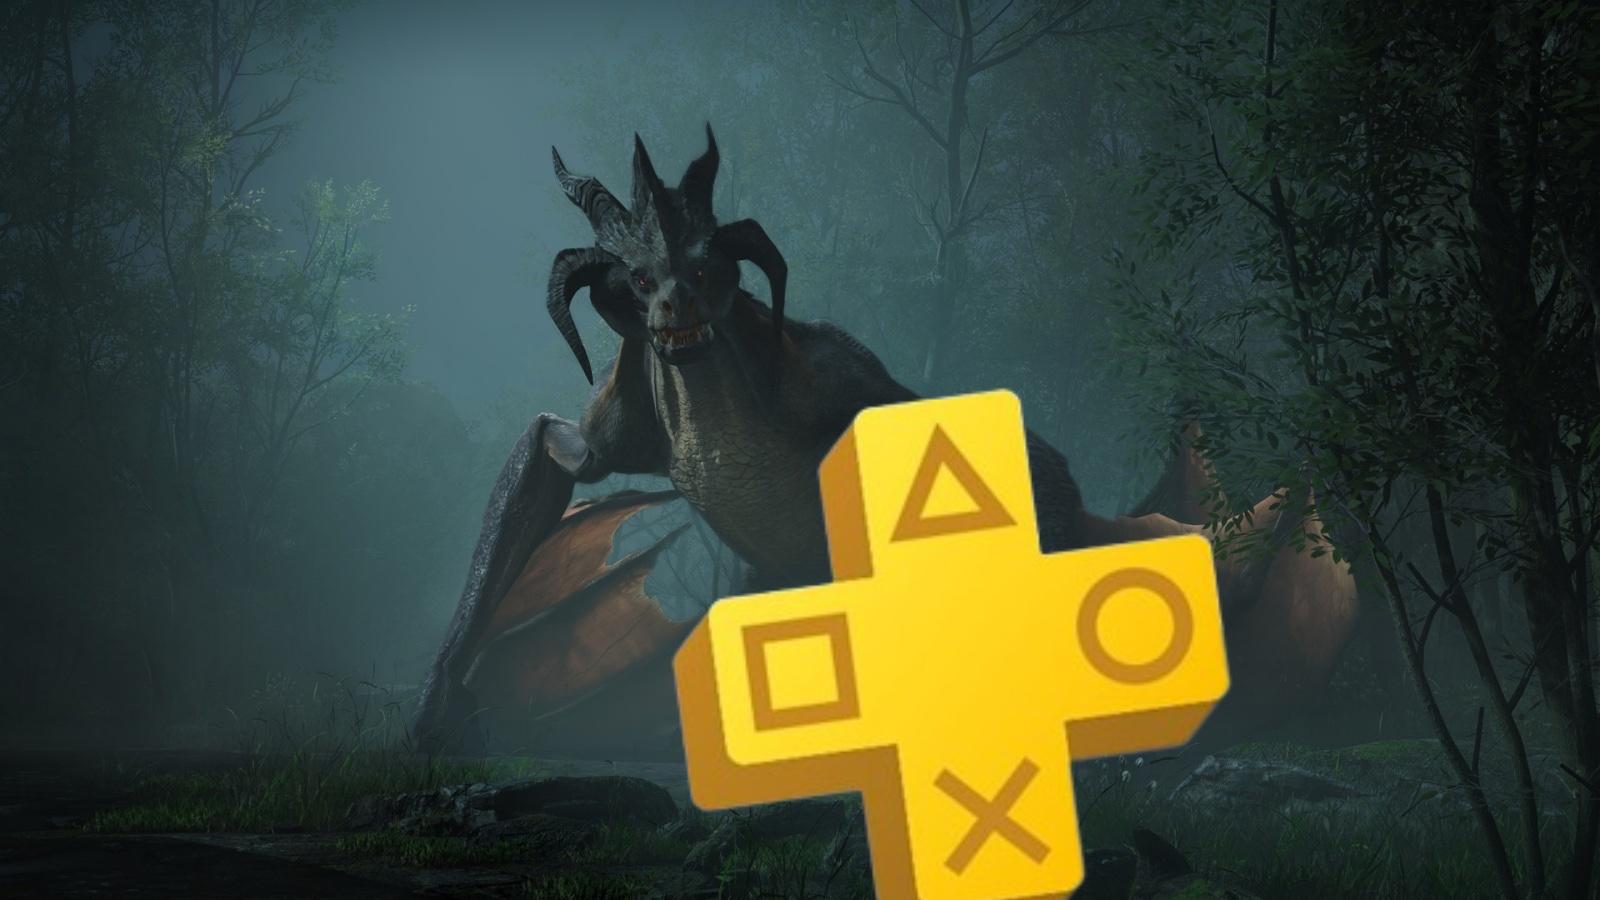 Playstation Plus Essential FREE GAMES FEVEREIRO 2023 (PS4/PS5) 